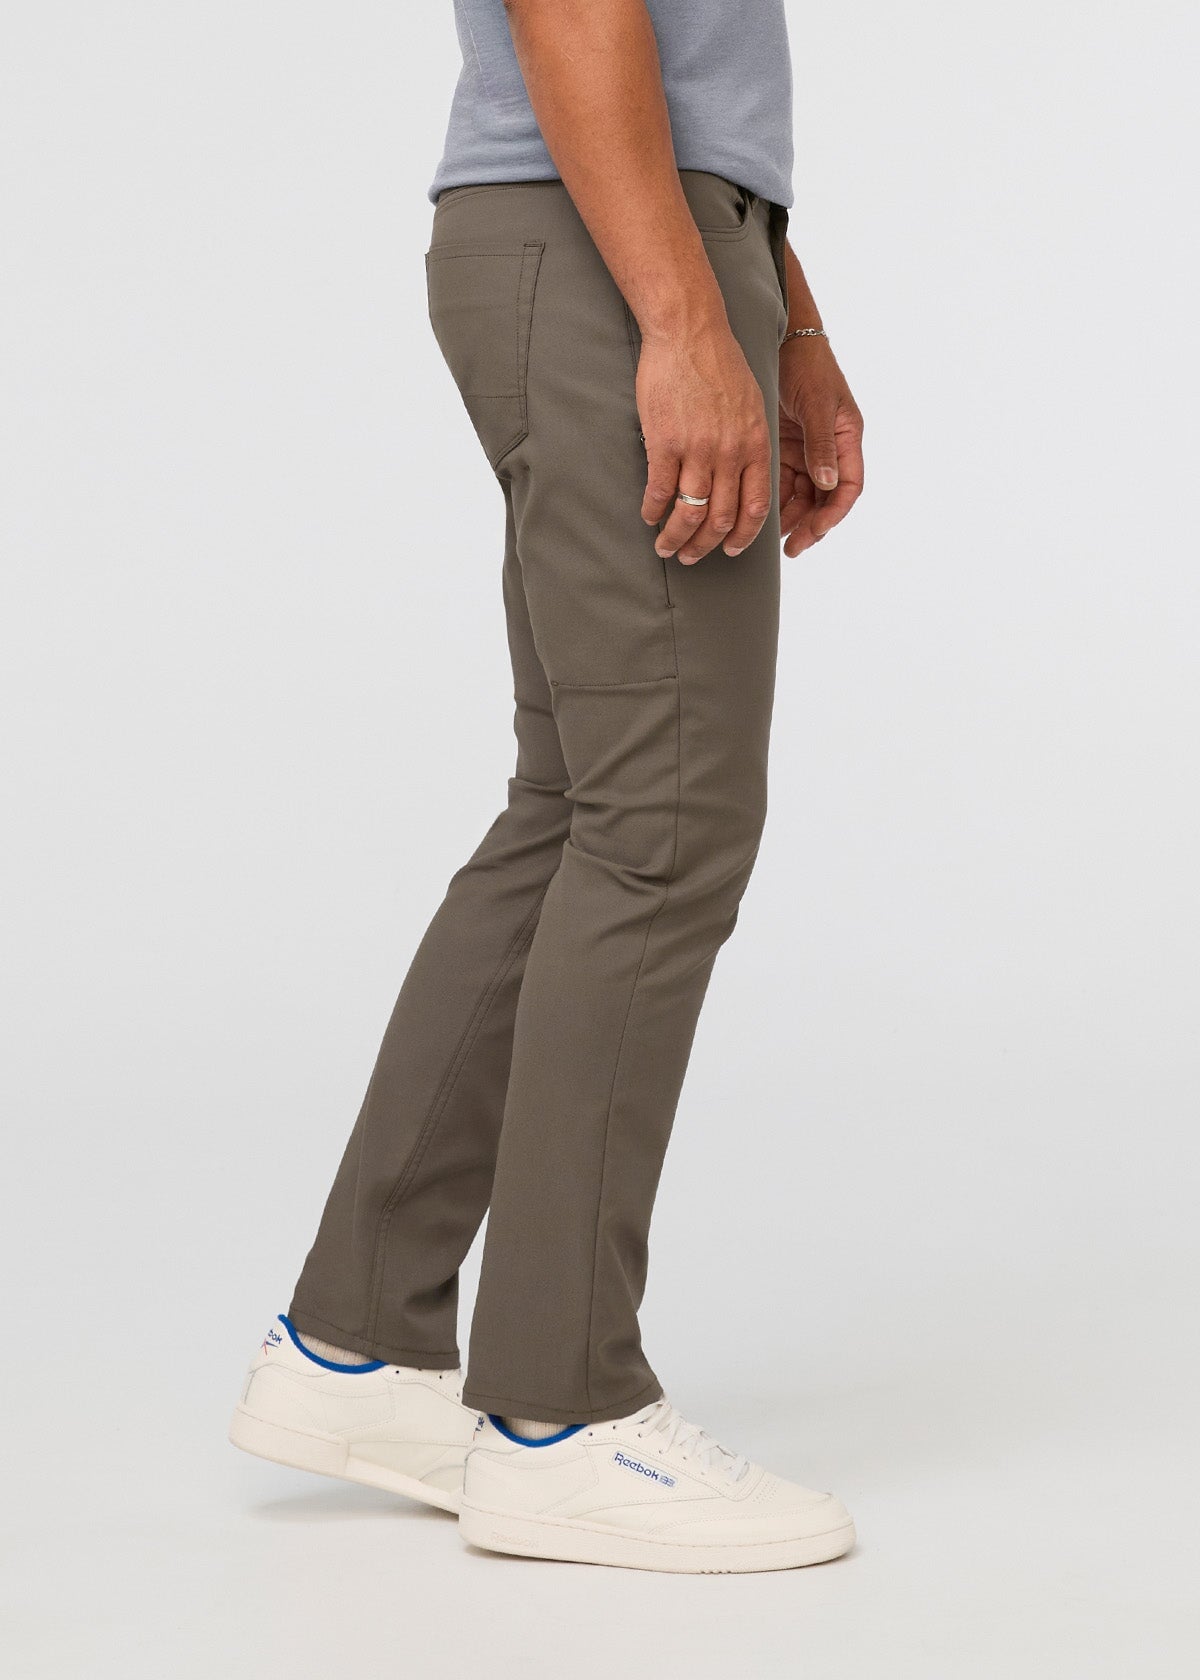 Buy ABS Slim Fit Khaki and Black Formal Trousers for Men Combo